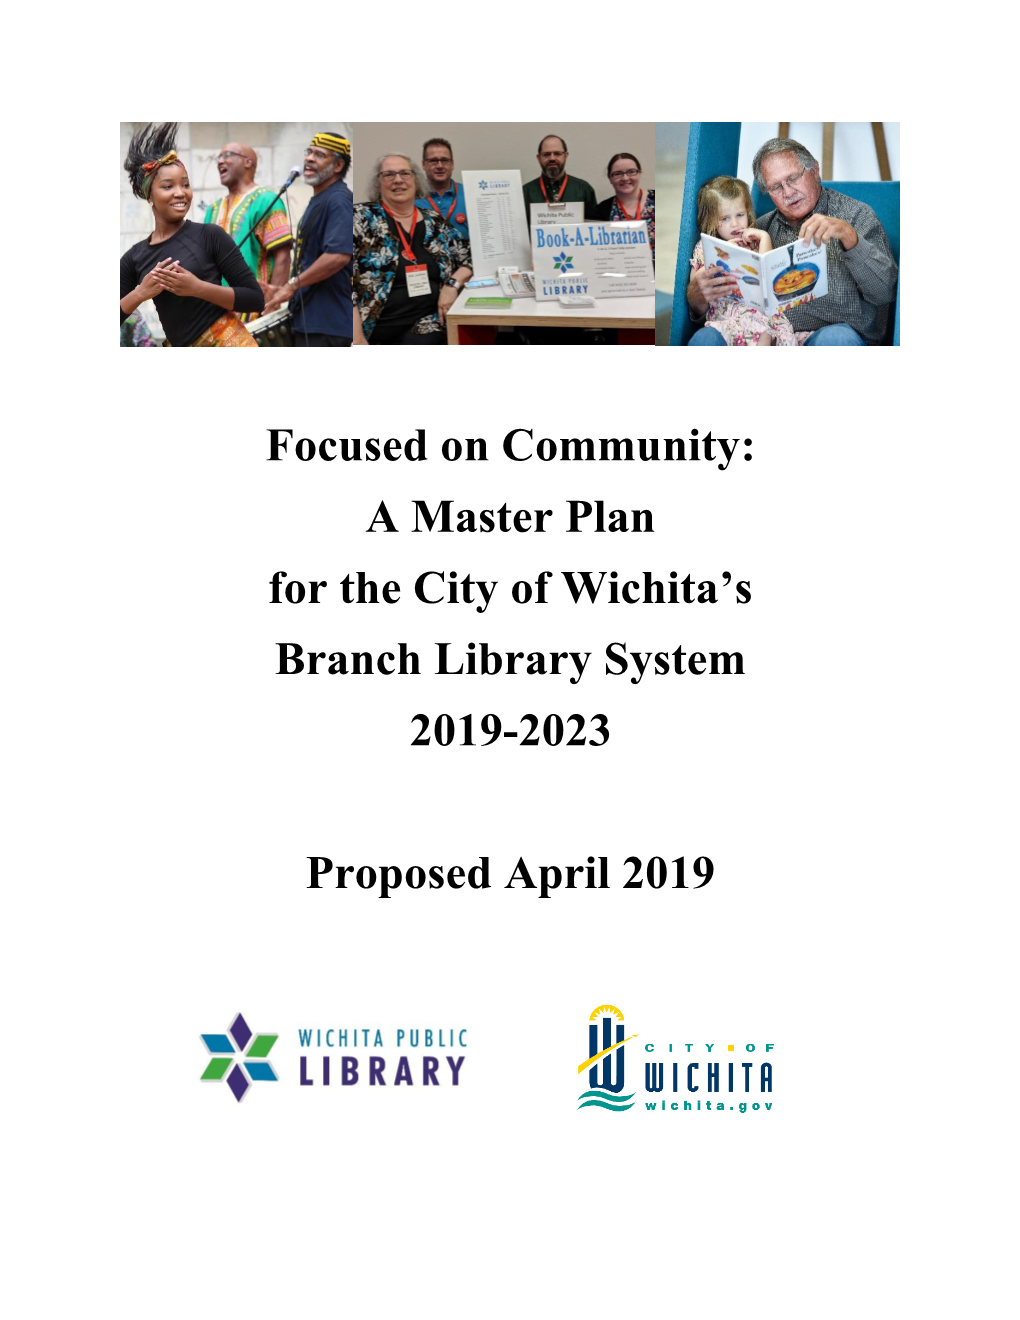 Focused on Community: a Master Plan for the City of Wichita's Branch